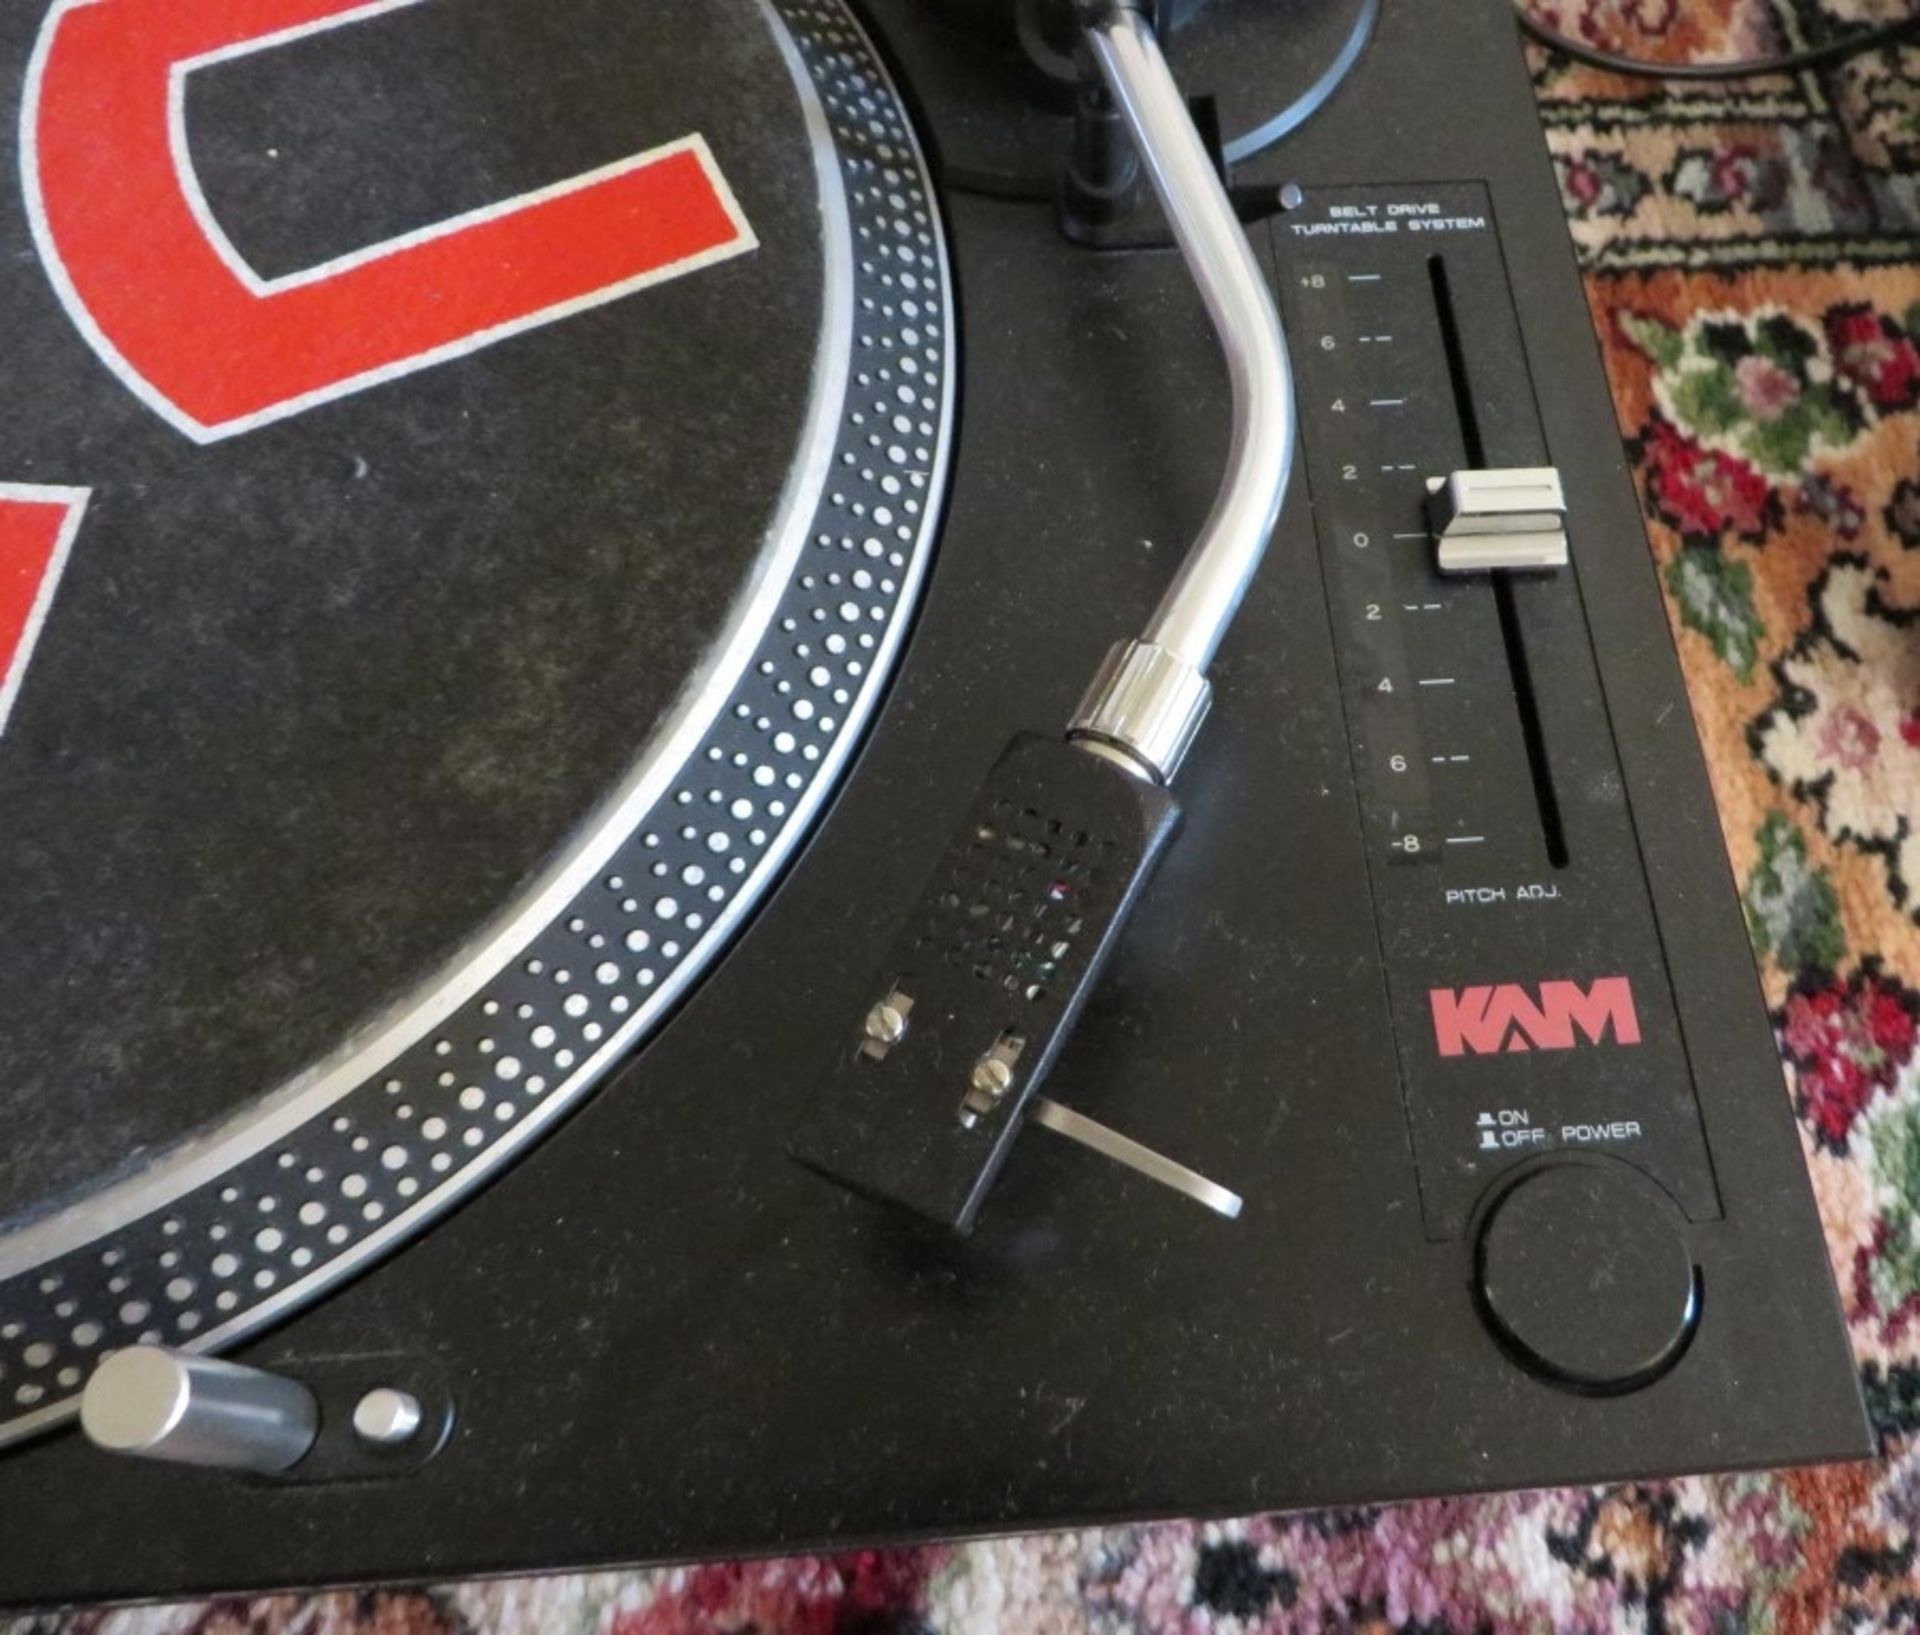 A Pair Of KAM Branded Full Manual Belt Drive Turntables / Decks - Both Preowned In Working Condition - Image 4 of 5